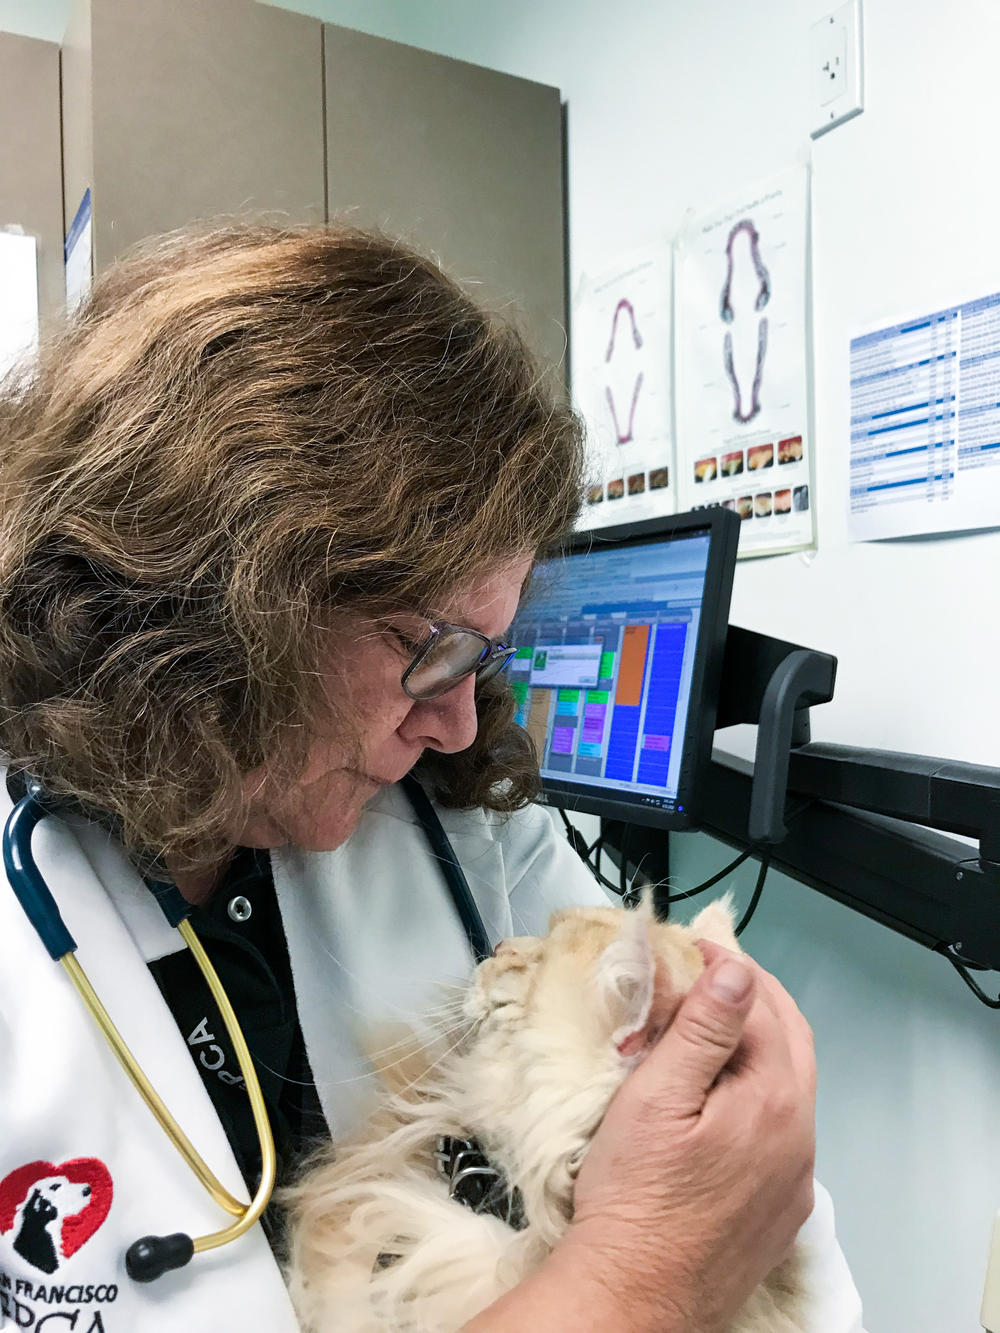 Veterinarian Kathy Gervais works 12-hour days, not only caring for animals, but also helping humans emotionally cope with a sick pet.